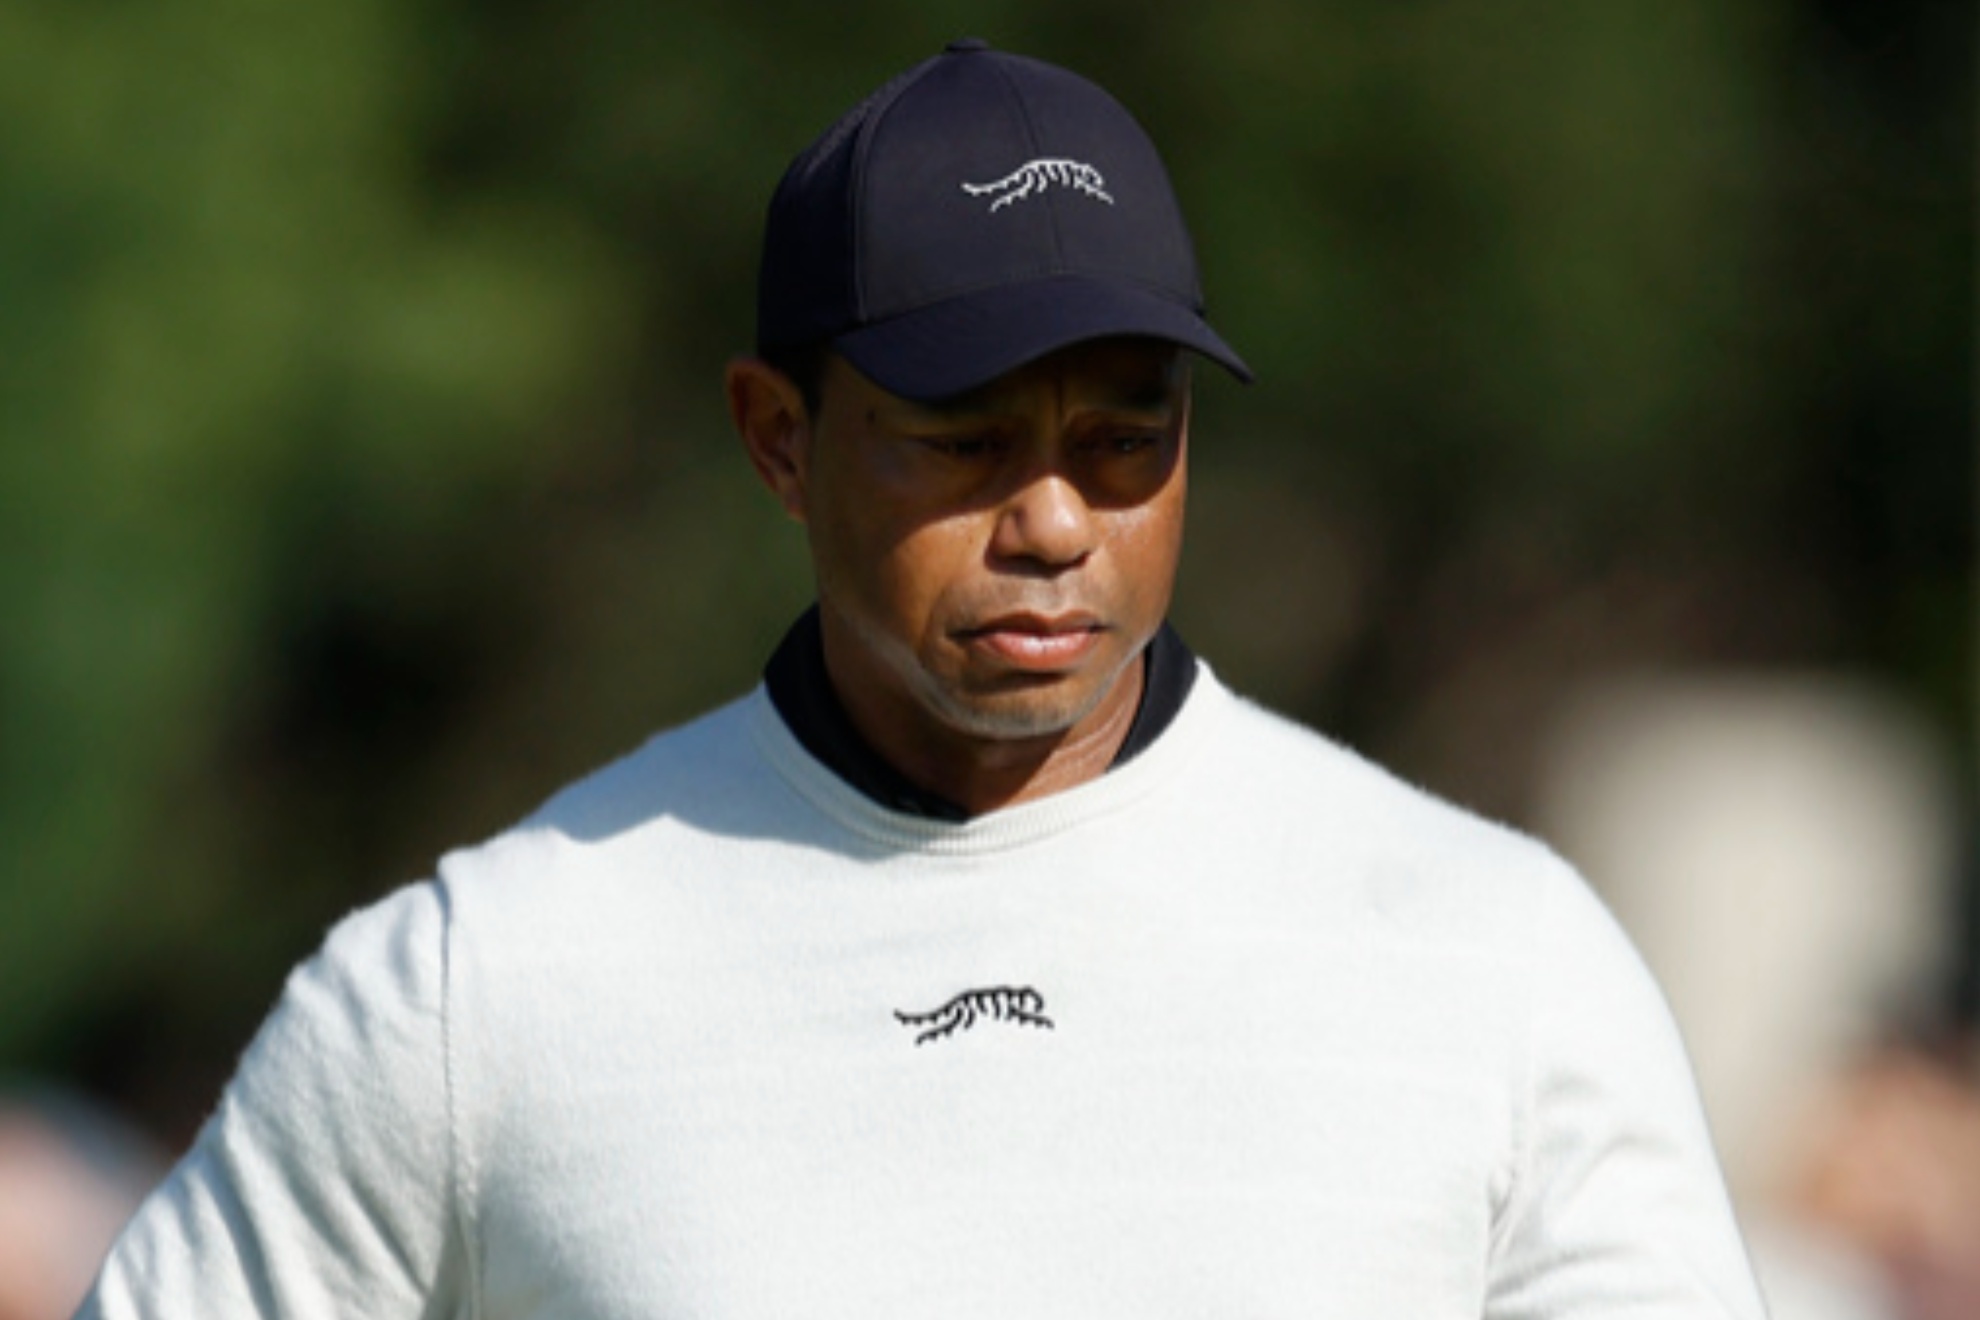 Tiger Woods at the Genesis Invitational golf tournament at Riviera Country Club